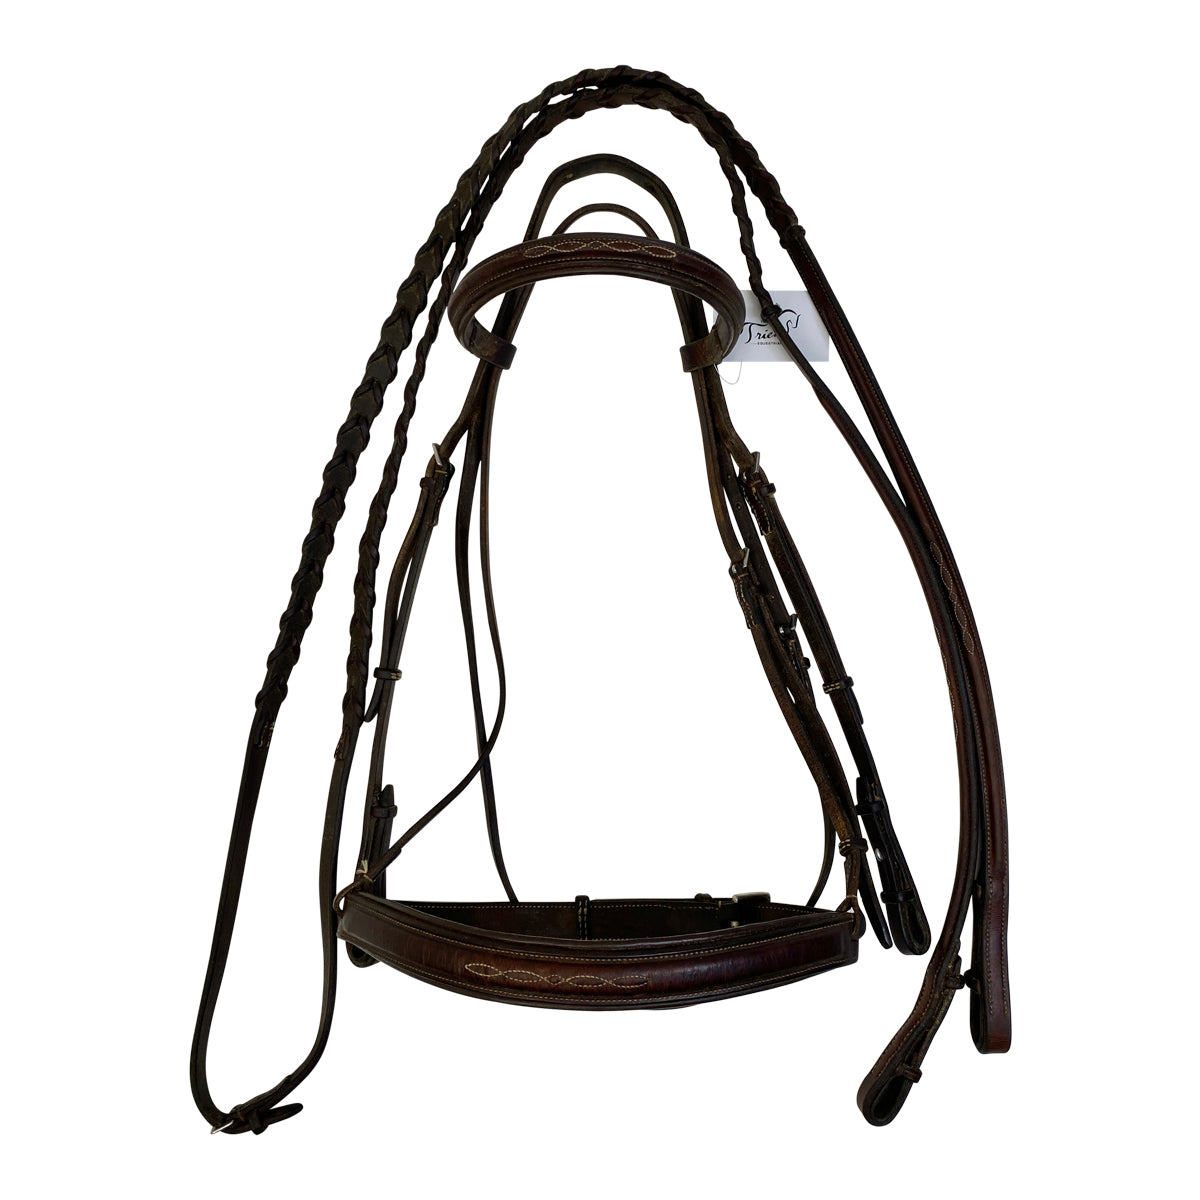 Edgewood Wide Noseband Hunter Bridle w/Laced Reins in Brown